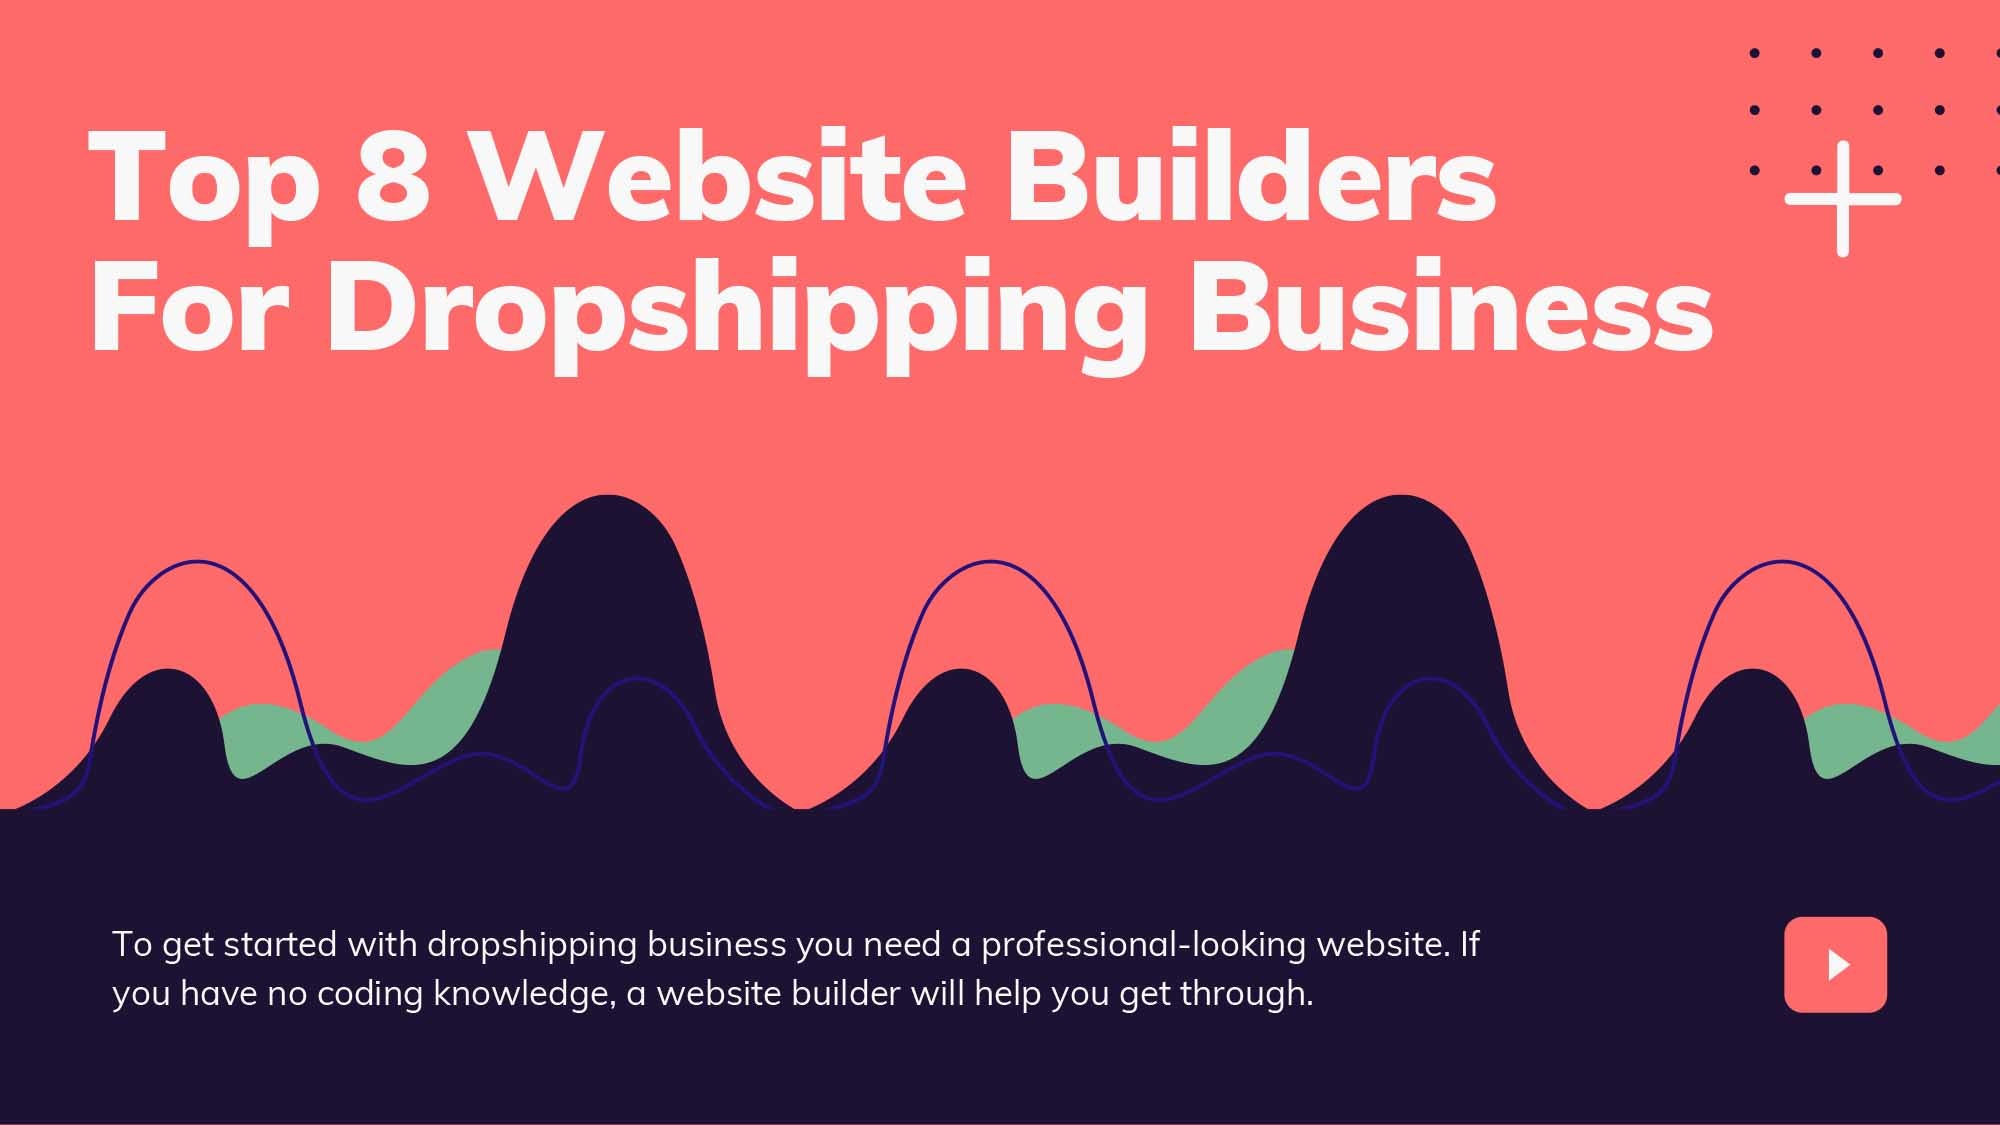 Top 7 Website Builders For Dropshipping Business